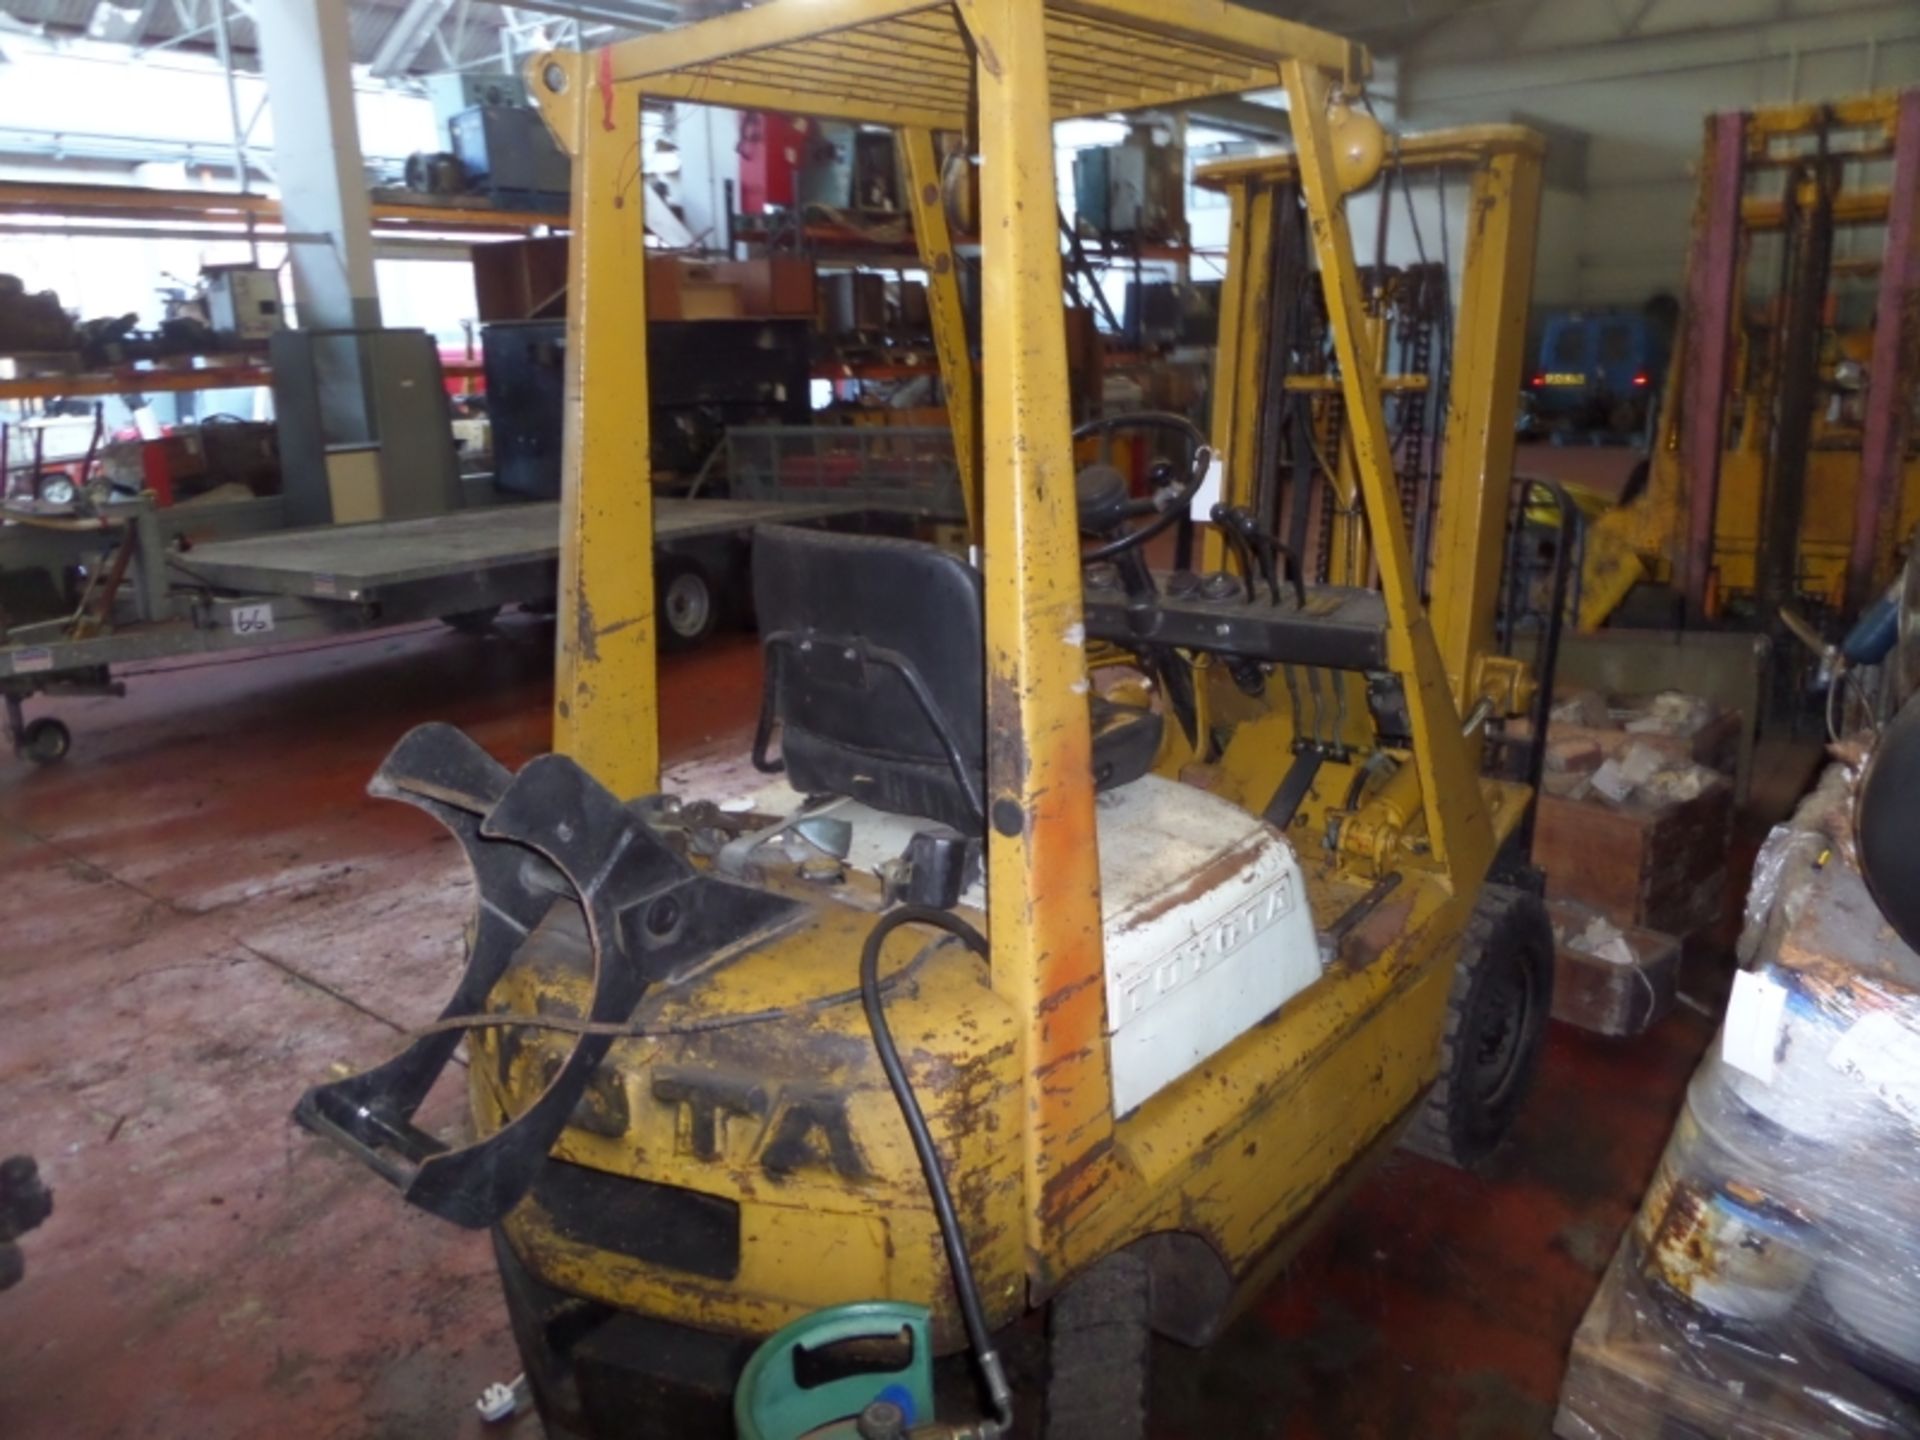 TOYOTA 423 FG15 Plant LPG / CNG - VIN: 403FG1562171 - Year: . - 7,449 Hours - Duplex Forklift - Image 4 of 5